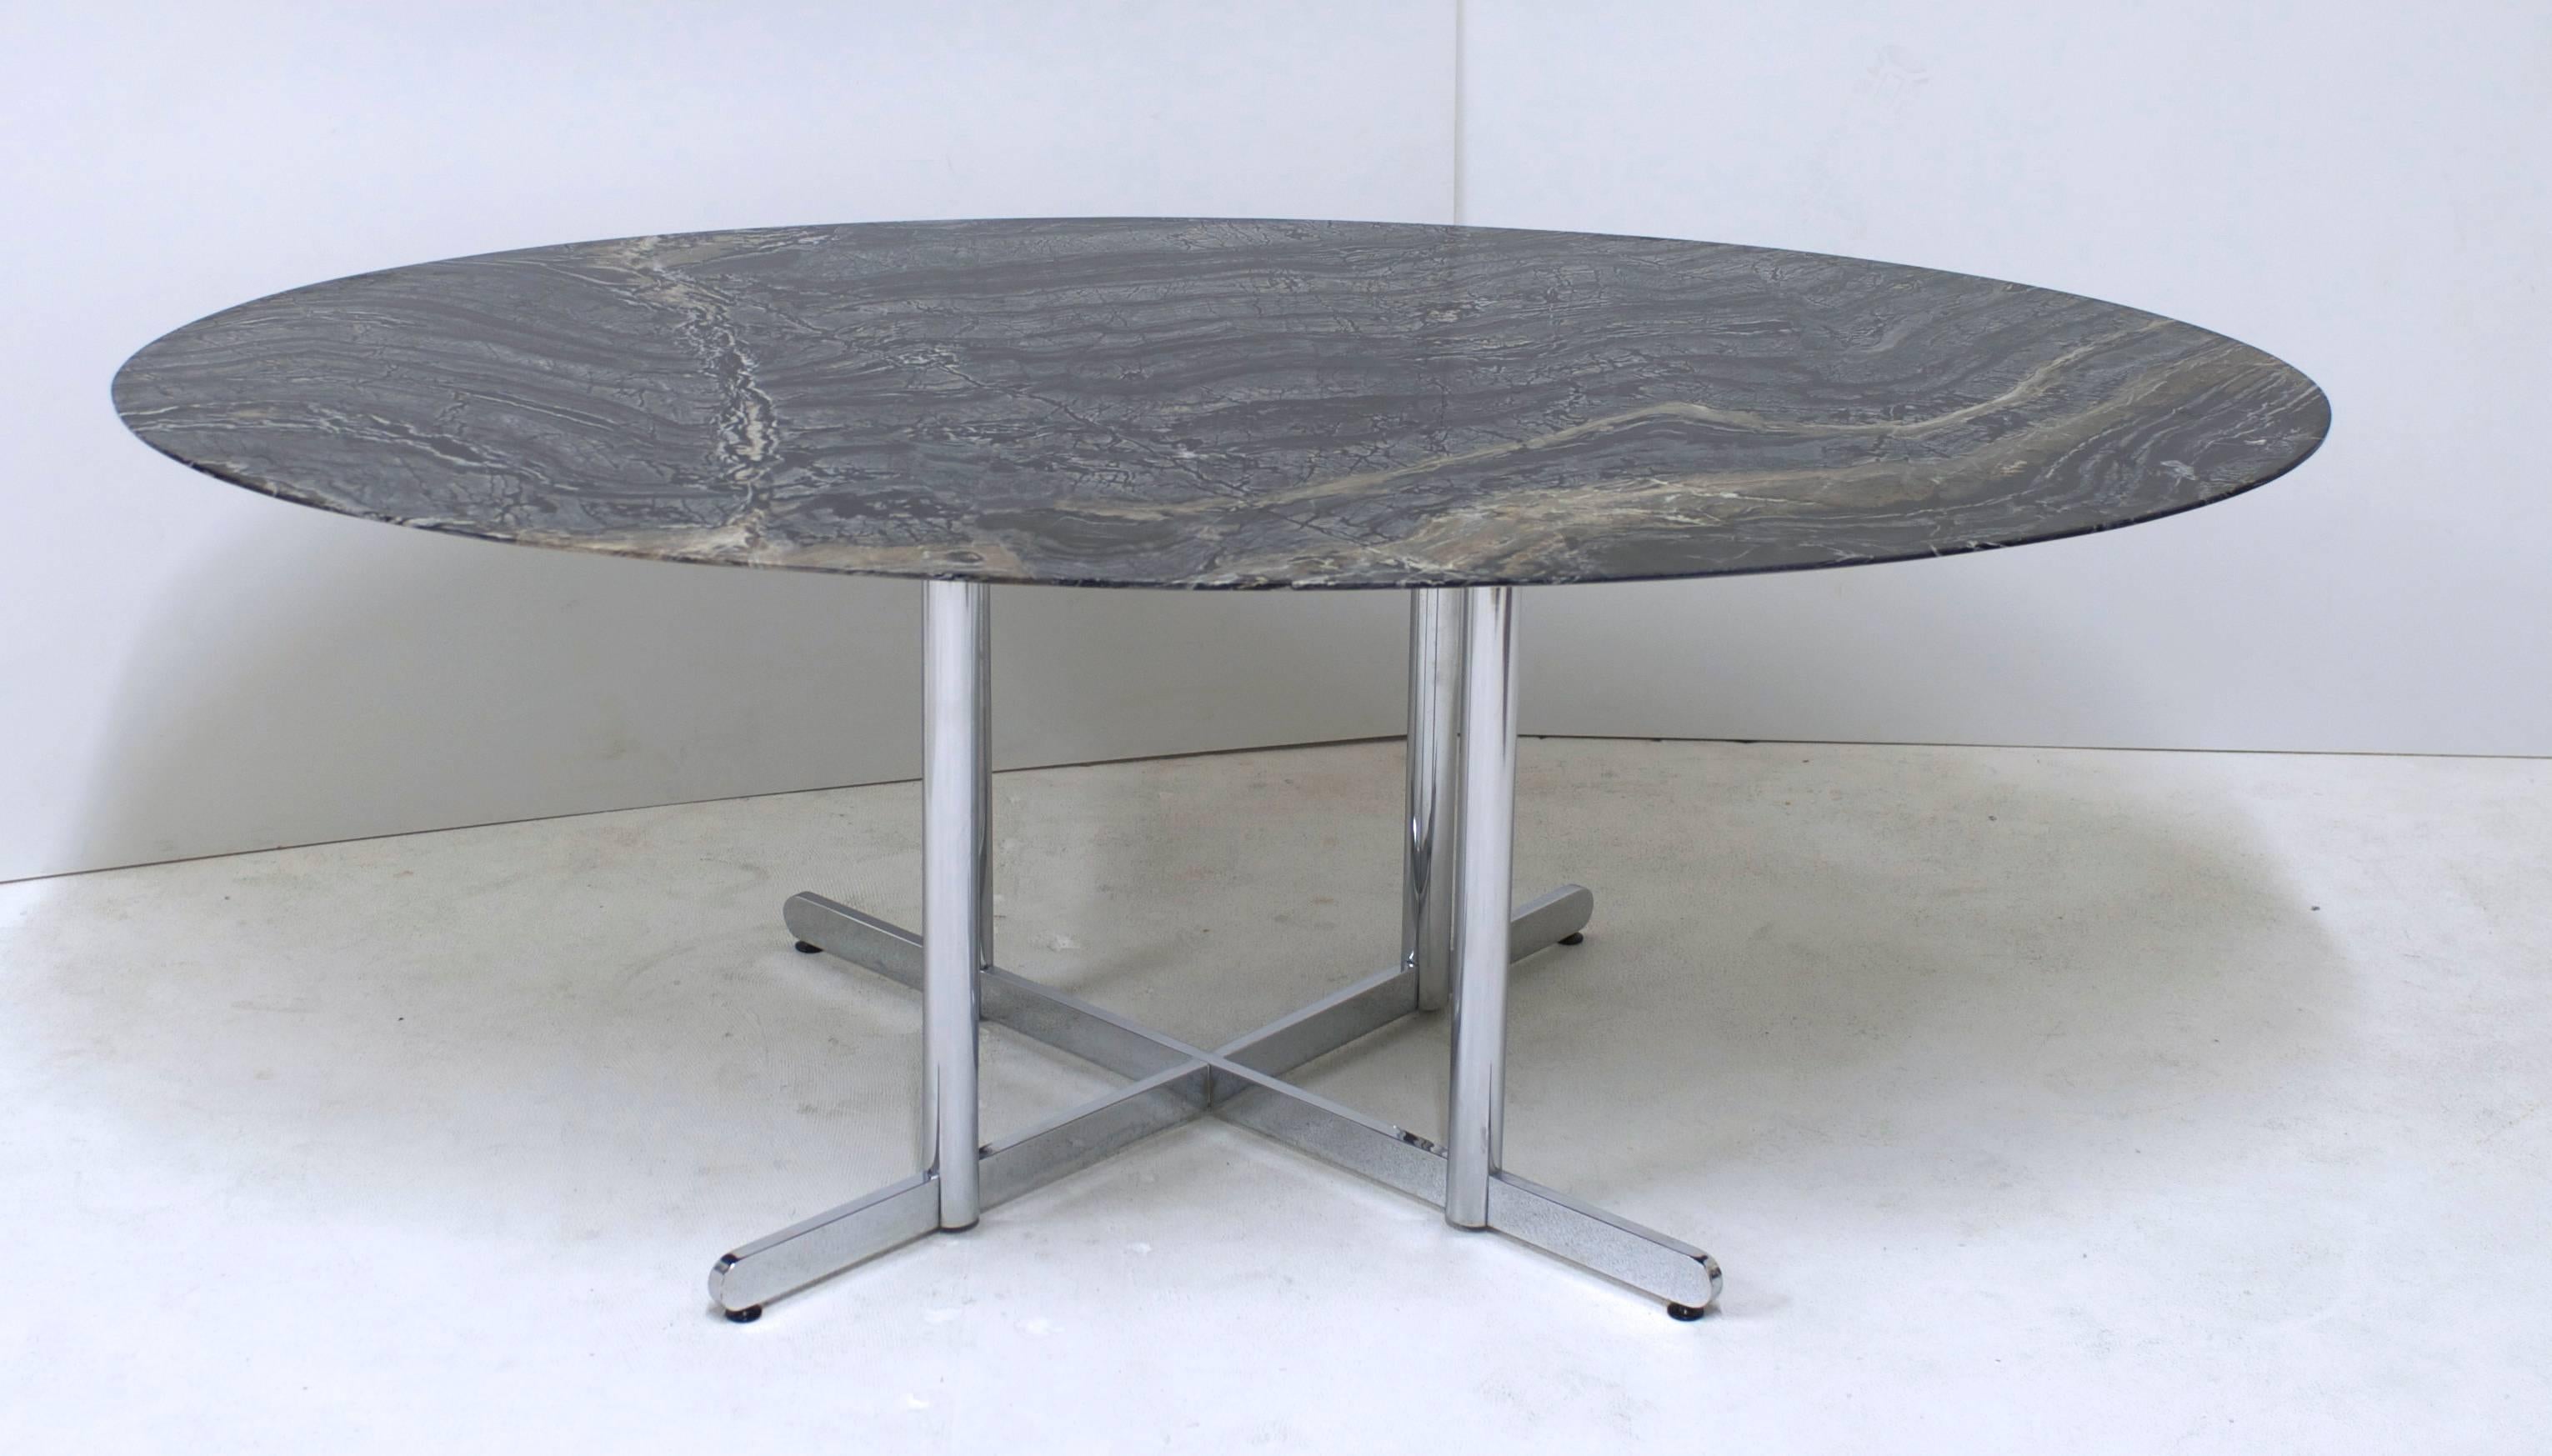 A Knoll style oval marble top with a knife edge. The marble has beautiful veining that looks like petrified wood. The colors are mix of charcoal to deep lava contrasted with some light grey highlights with some brown veining. The stone is set on a